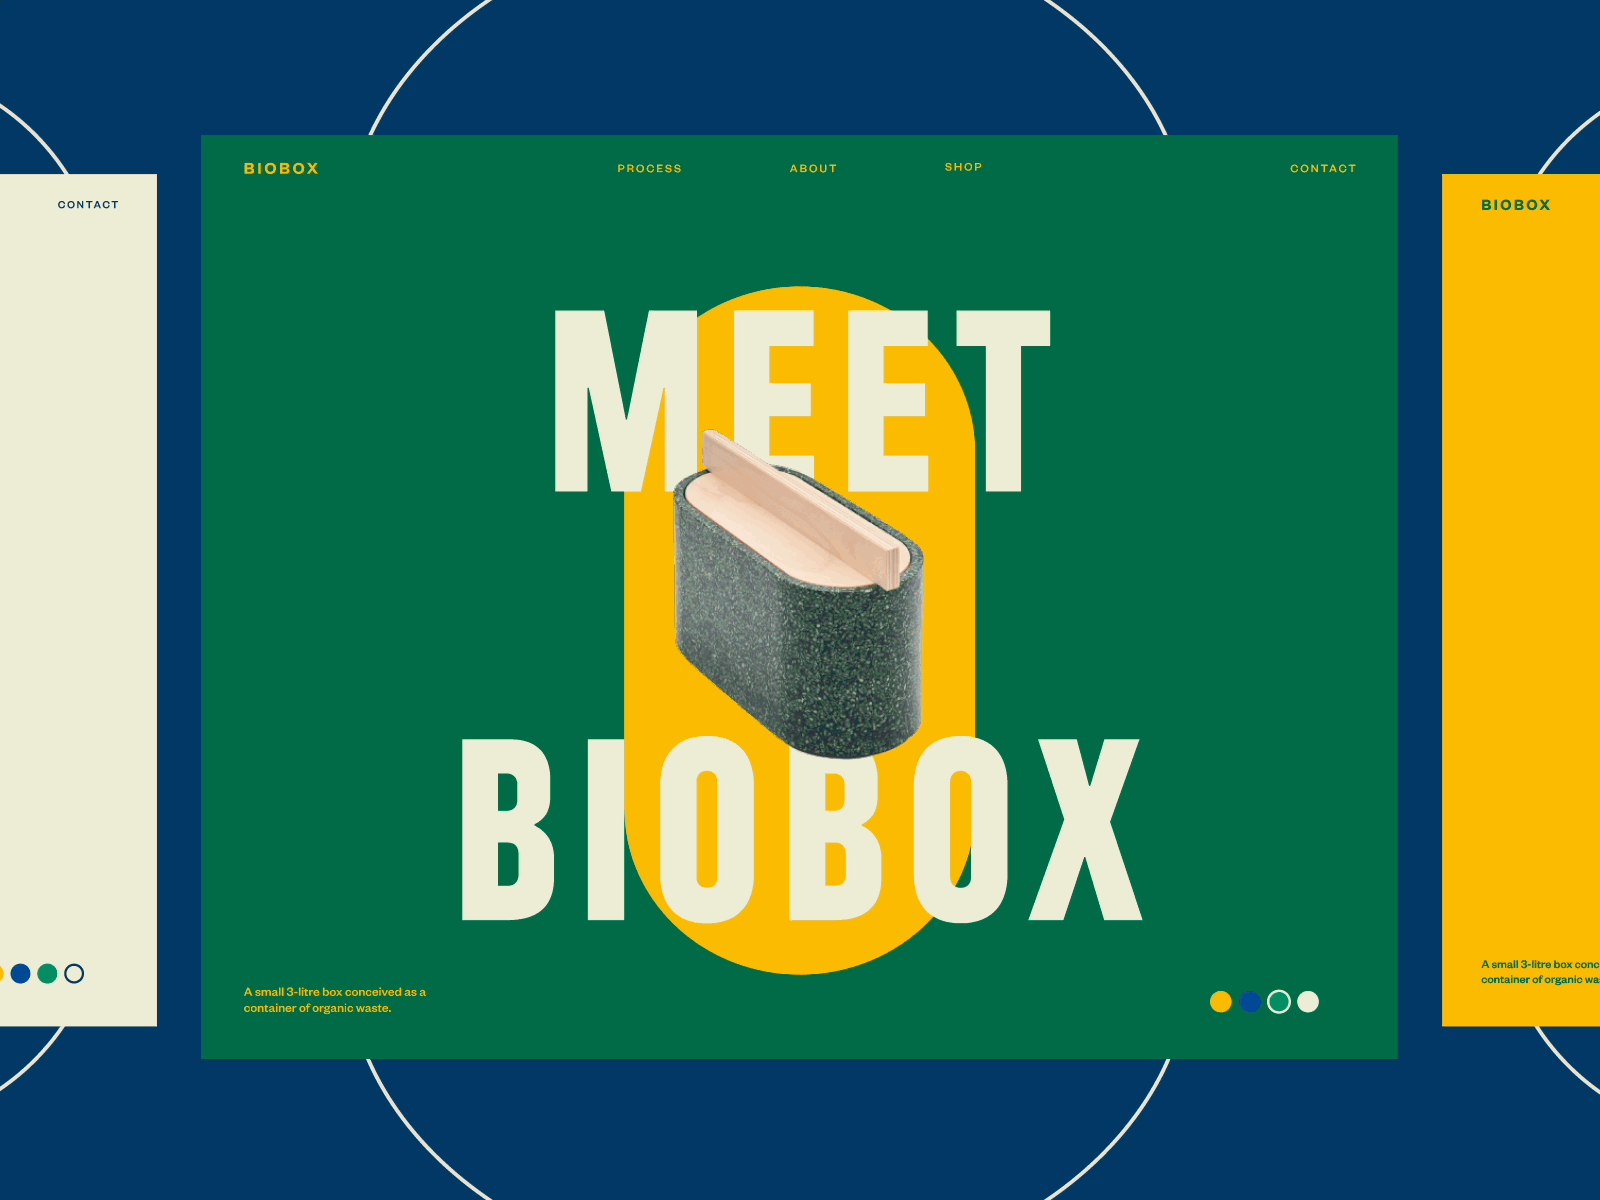 BIOBOX | A box that contains useful waste